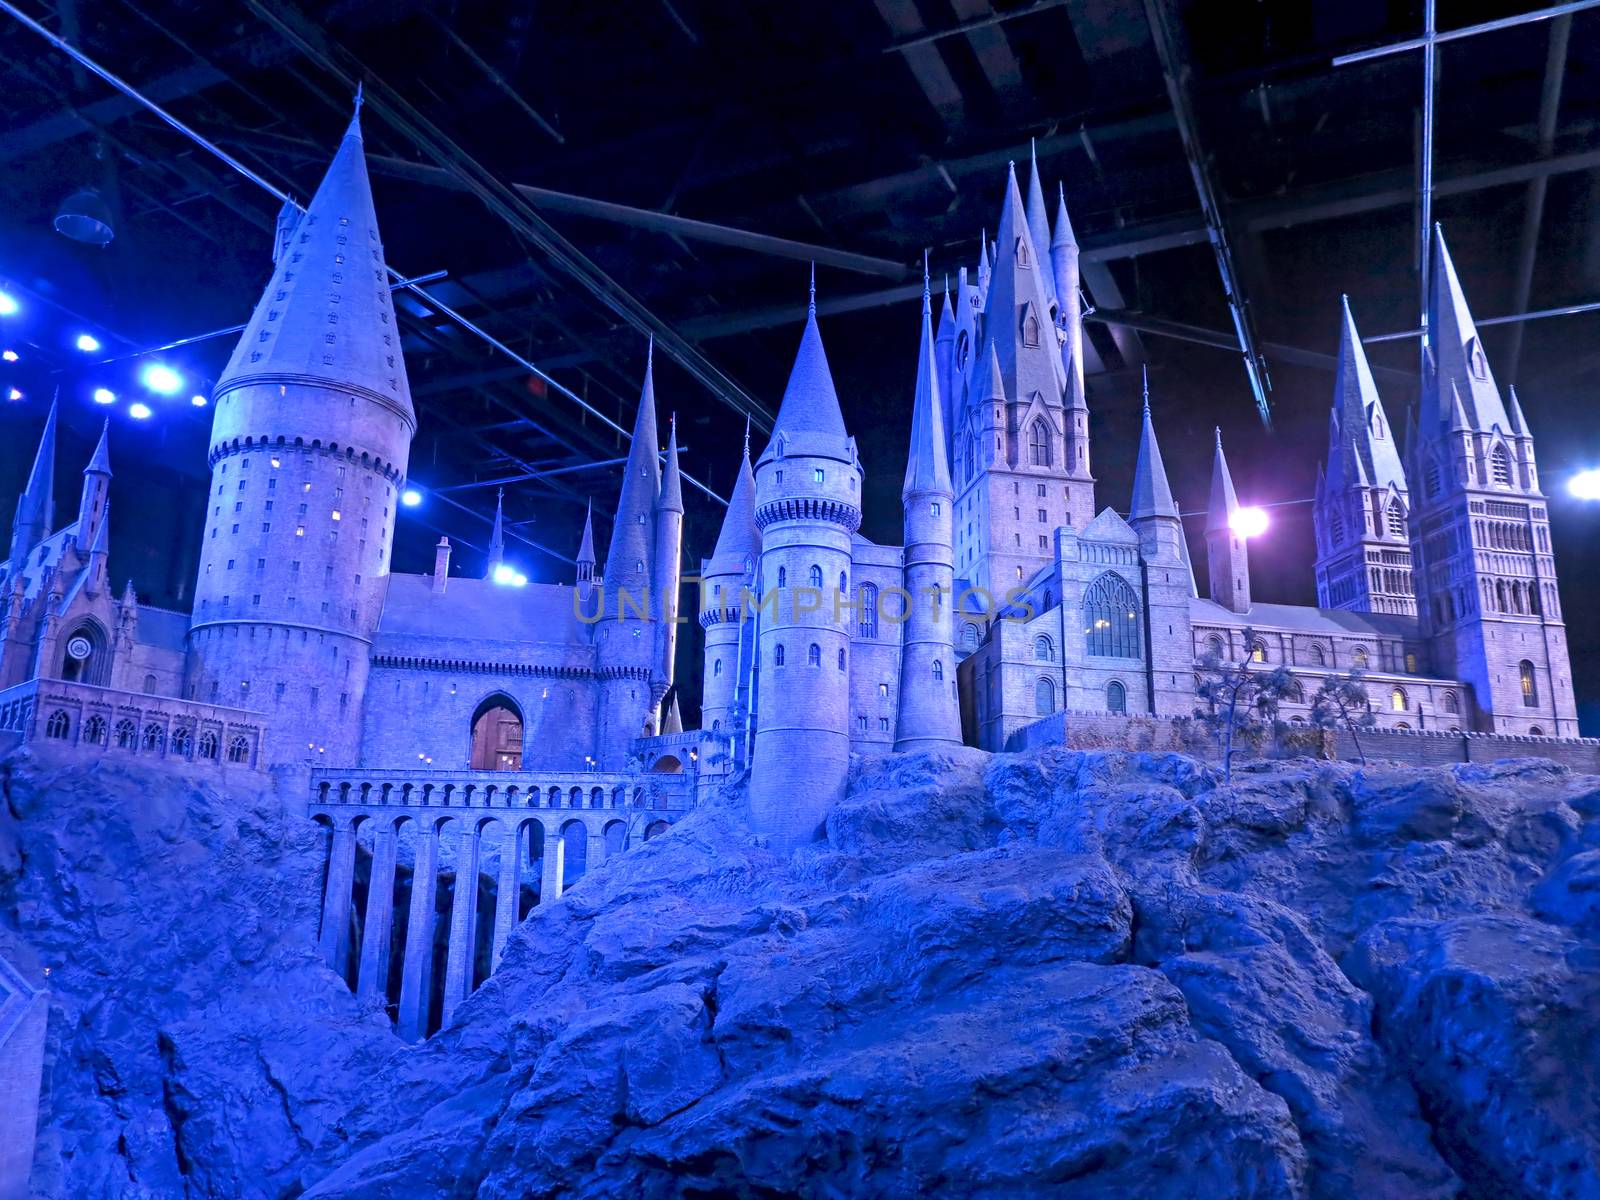 Scale model of Hogwarts by quackersnaps